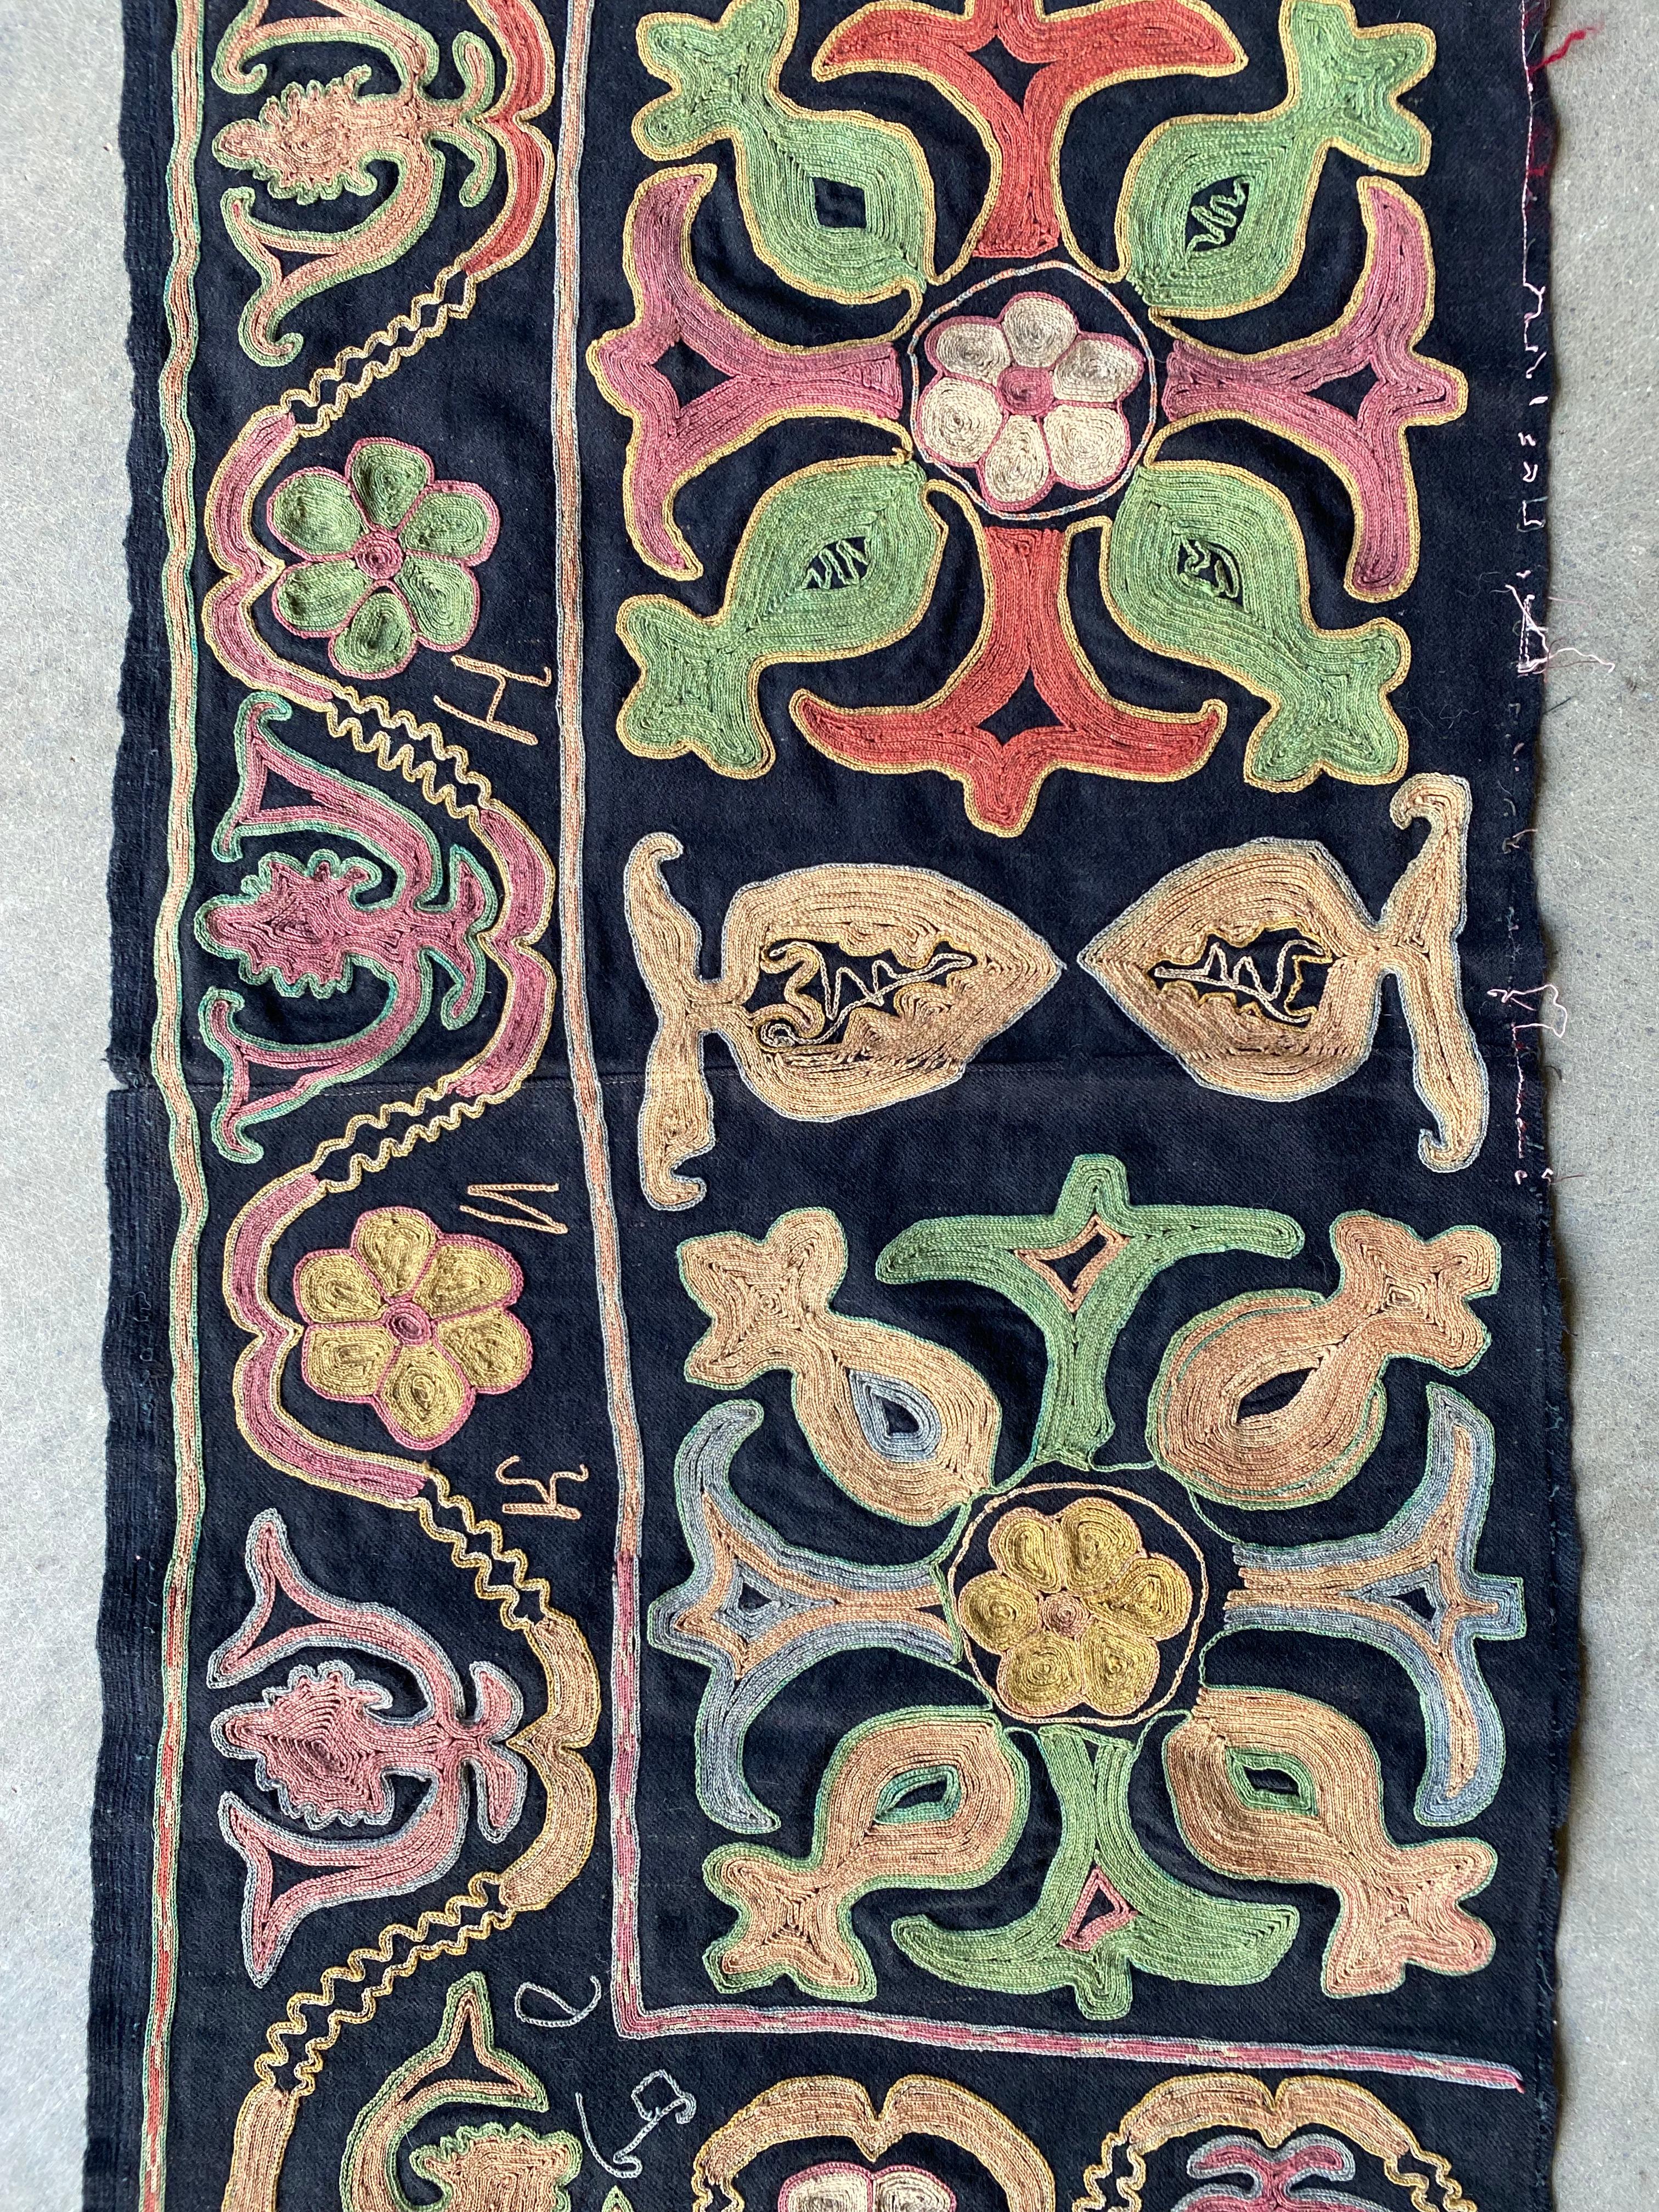 central asian embroidery